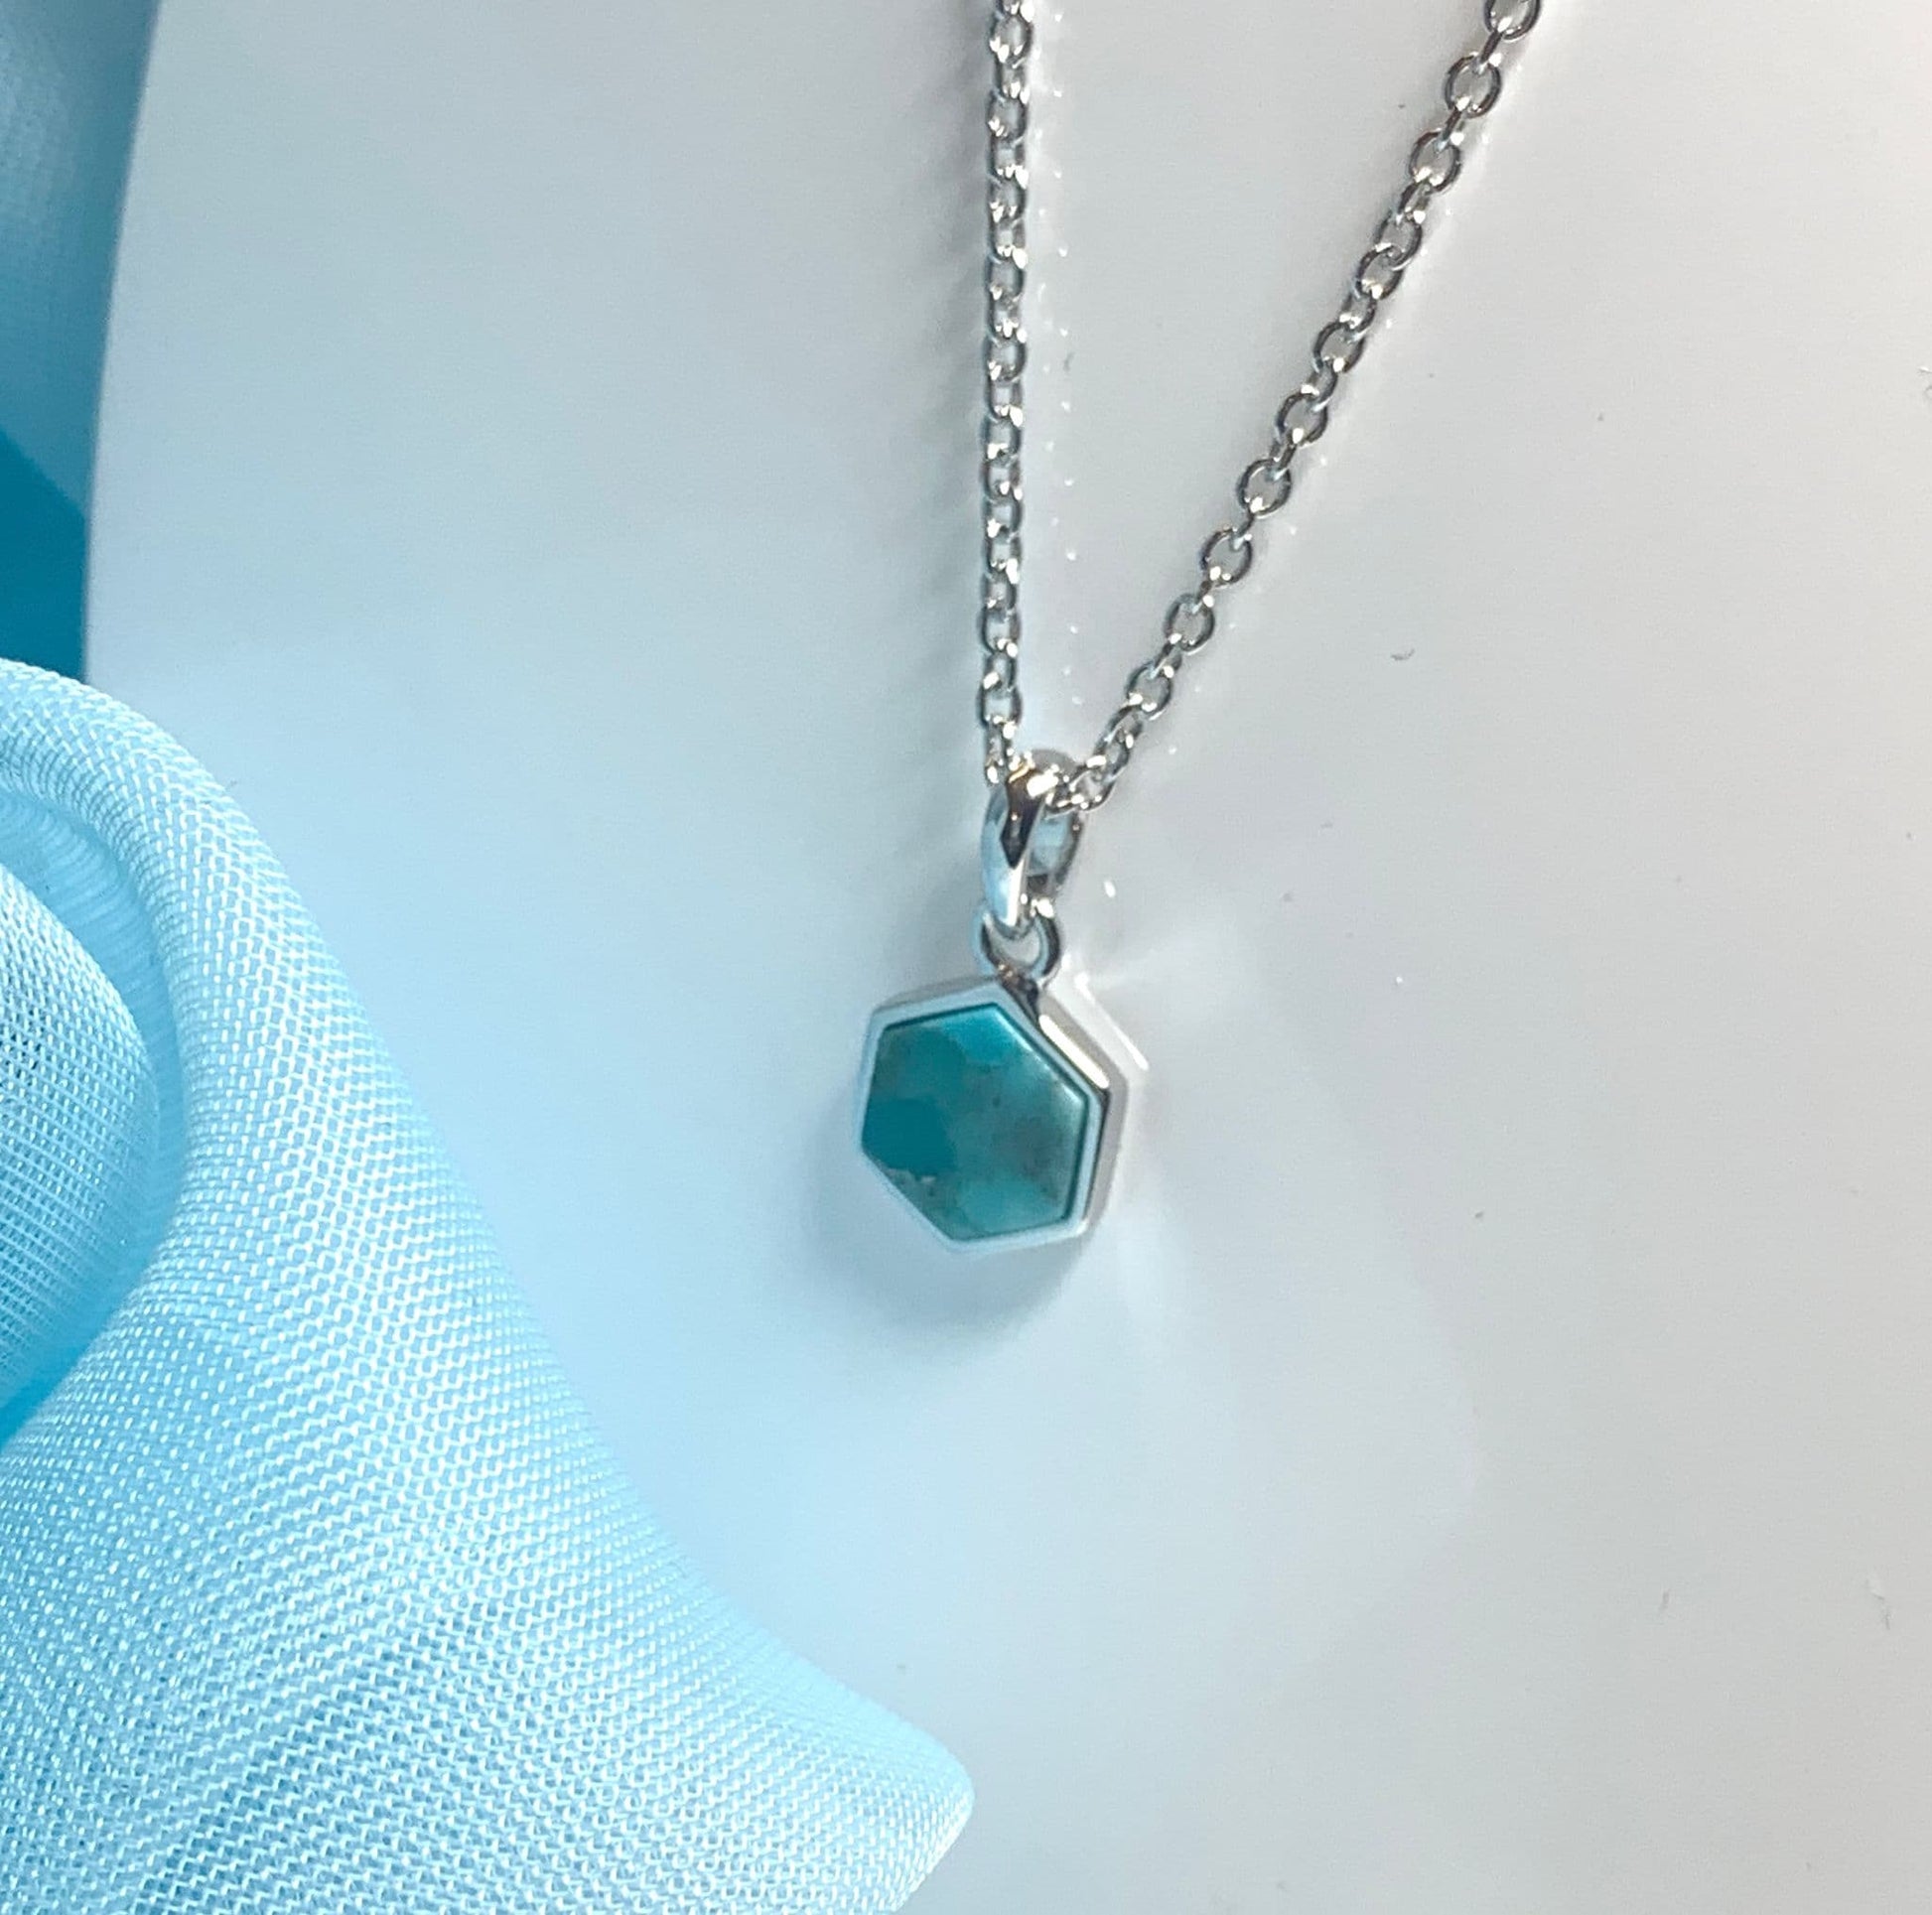 Turquoise blue green hexagonal necklace sterling silver